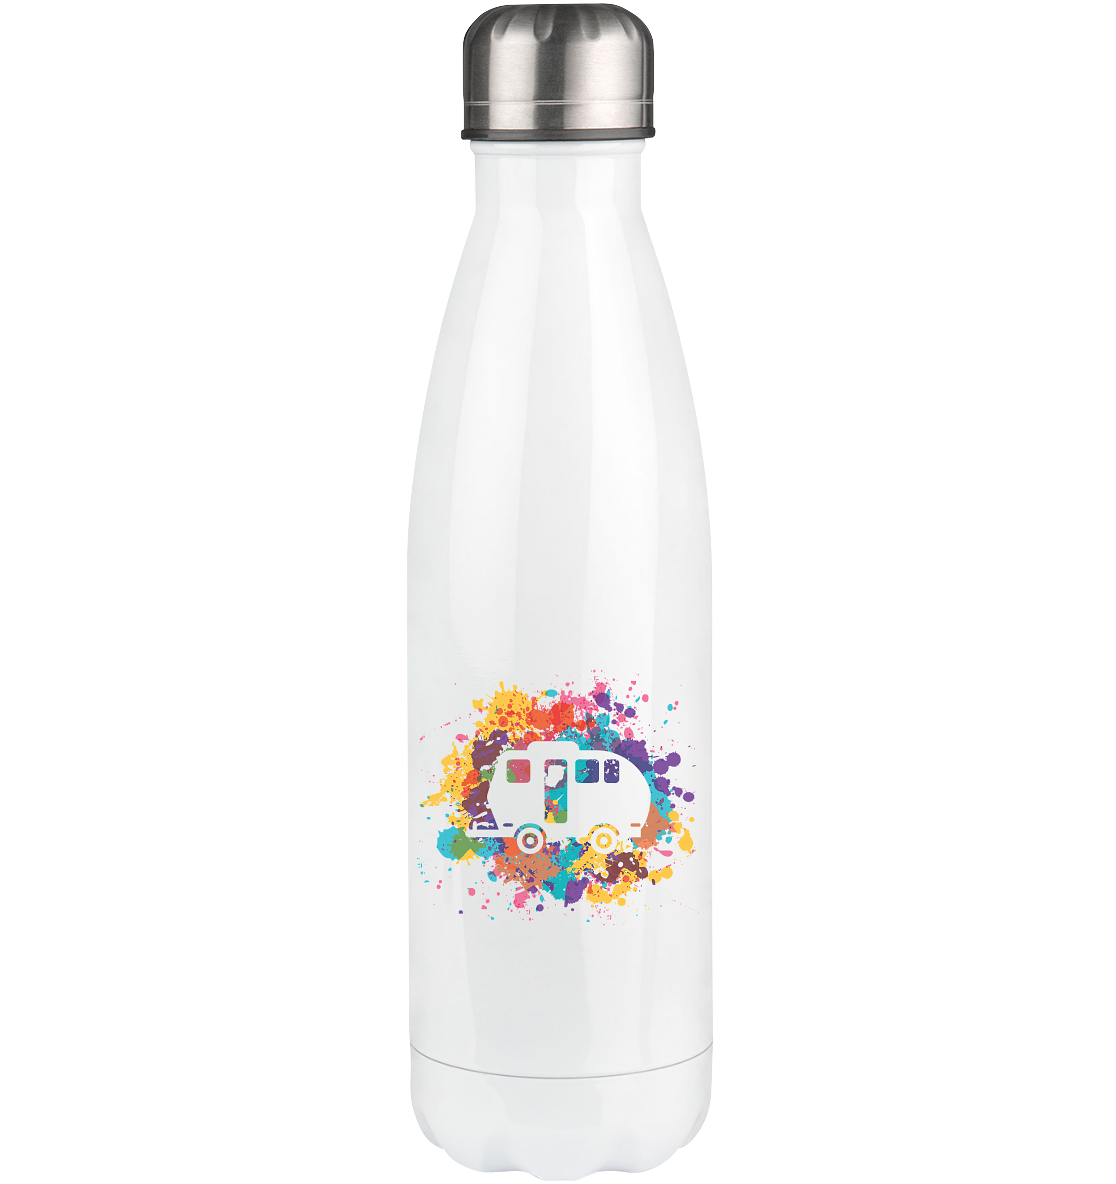 Colorful Splash and Camping 2 - Edelstahl Thermosflasche camping UONP 500ml